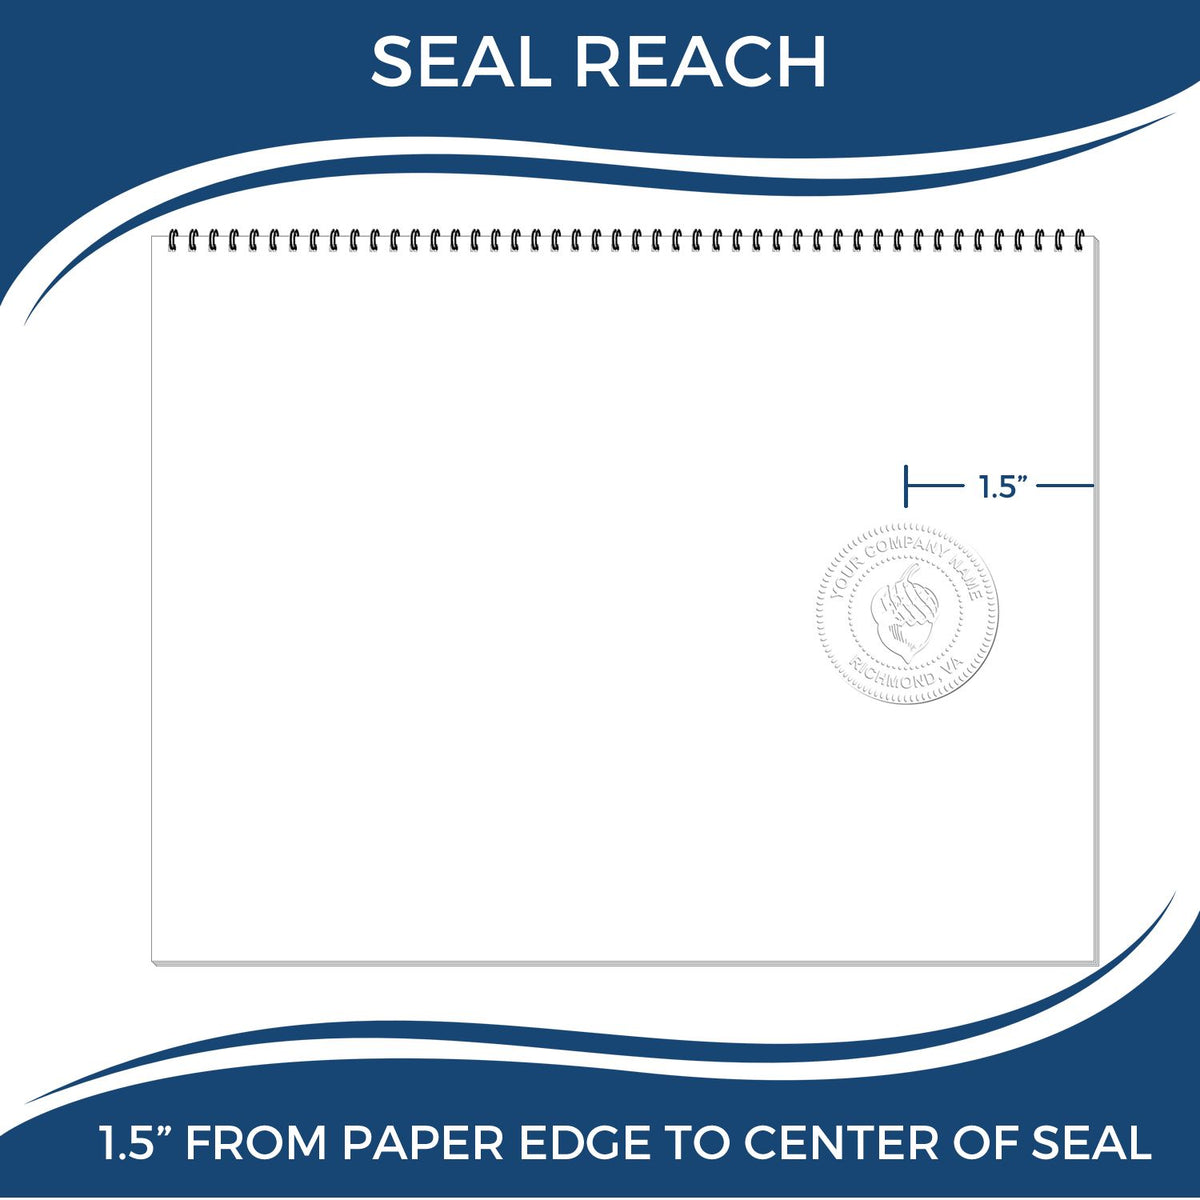 An infographic showing the seal reach which is represented by a ruler and a miniature seal image of the Soft Indiana Professional Geologist Seal